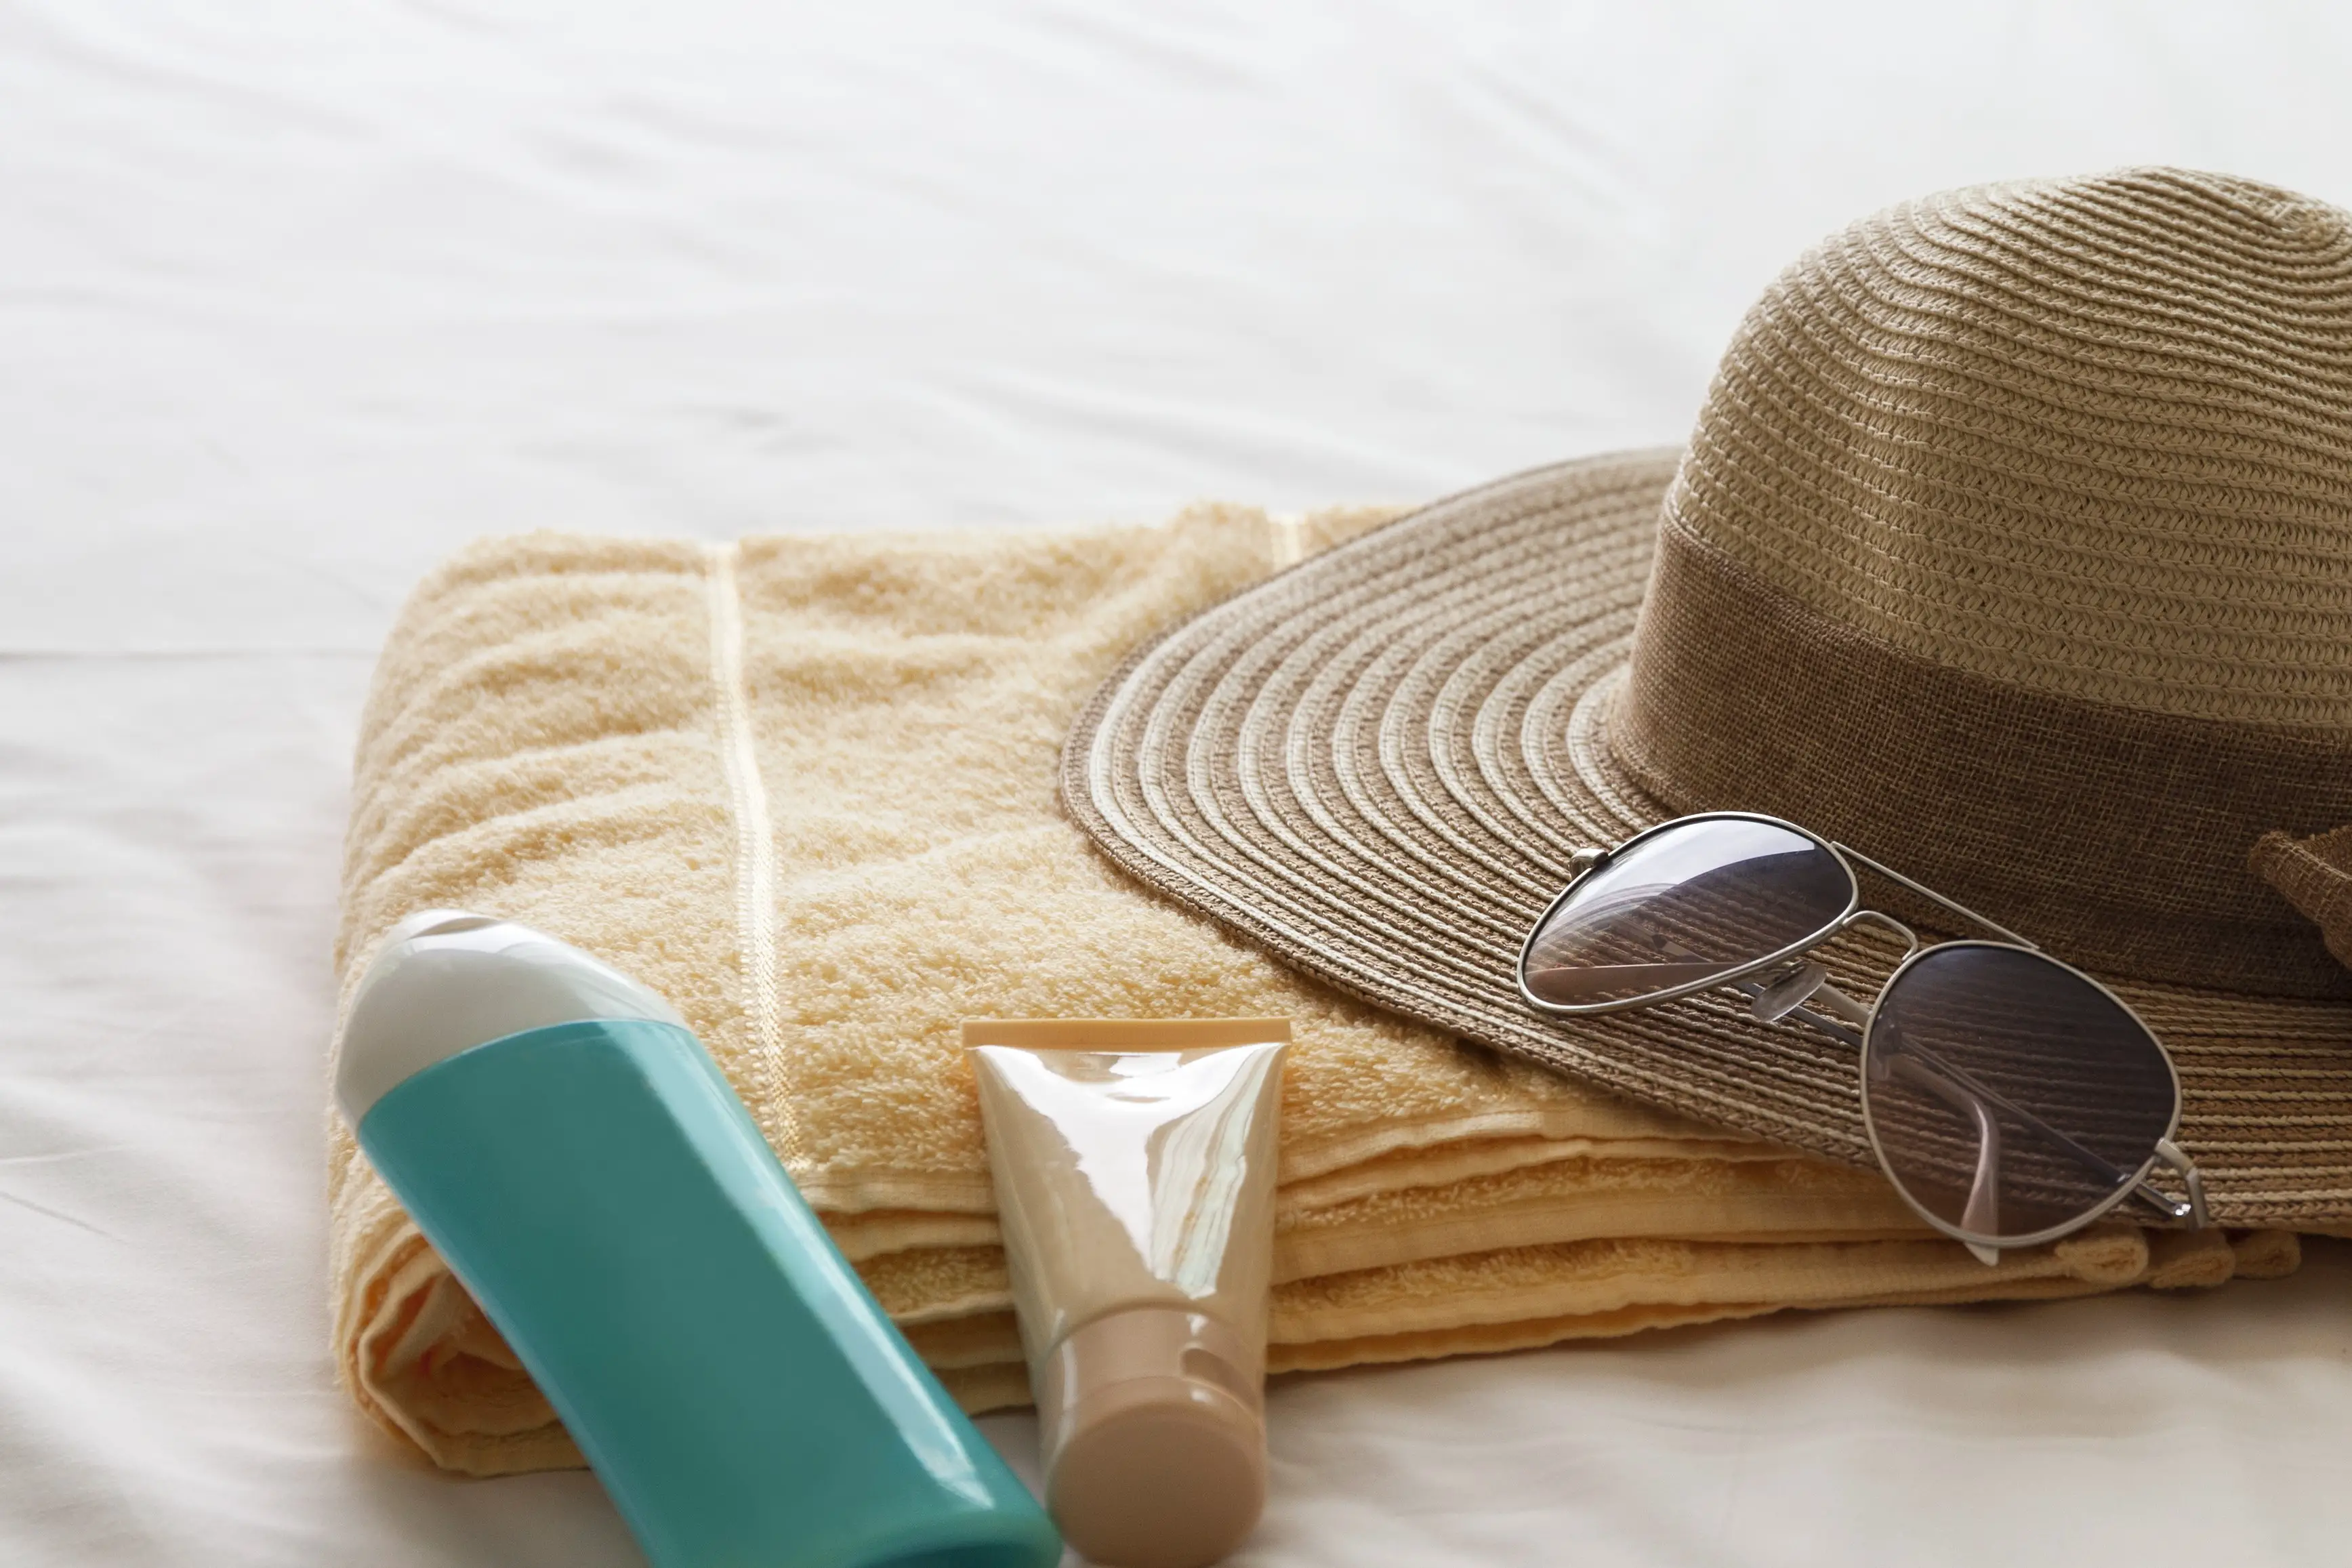 straw hat and lotions for travel